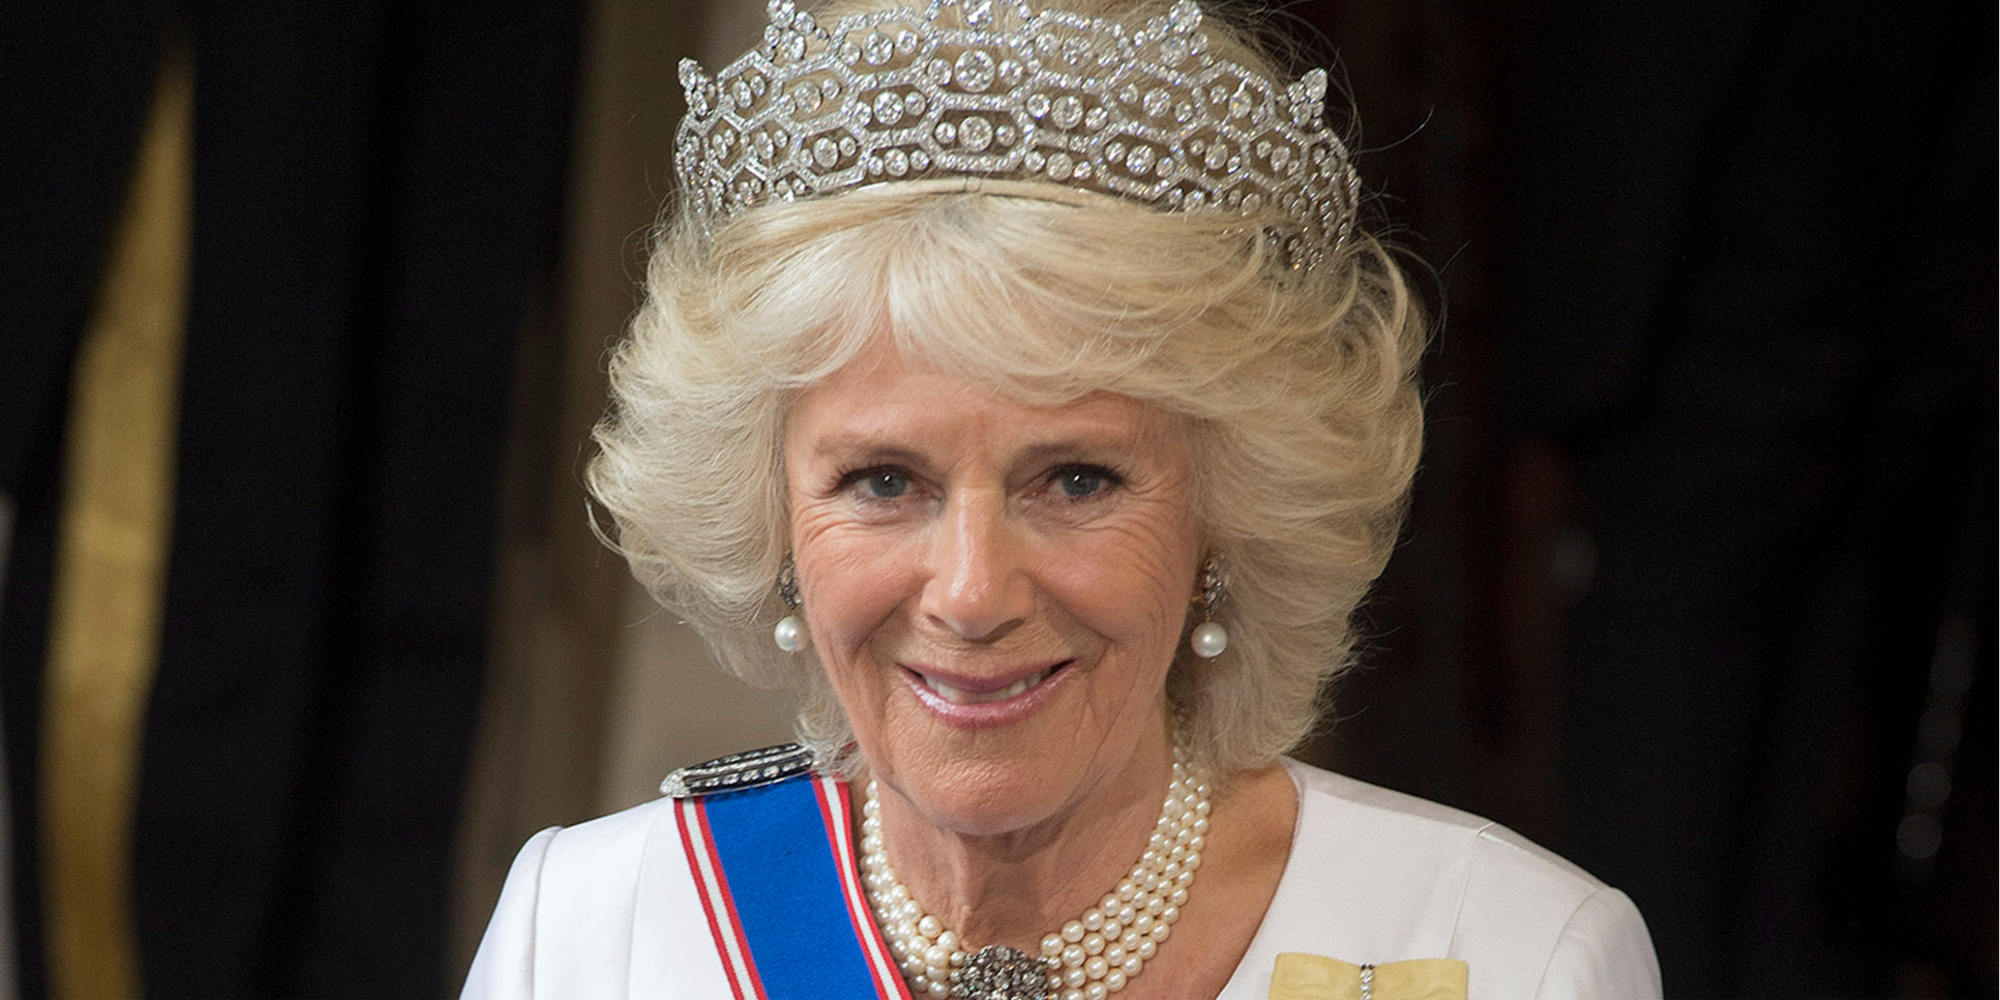 amilla, Duchess of Cornwall arrives at The State Opening of Parliament on May 18, 2016 in London, England.